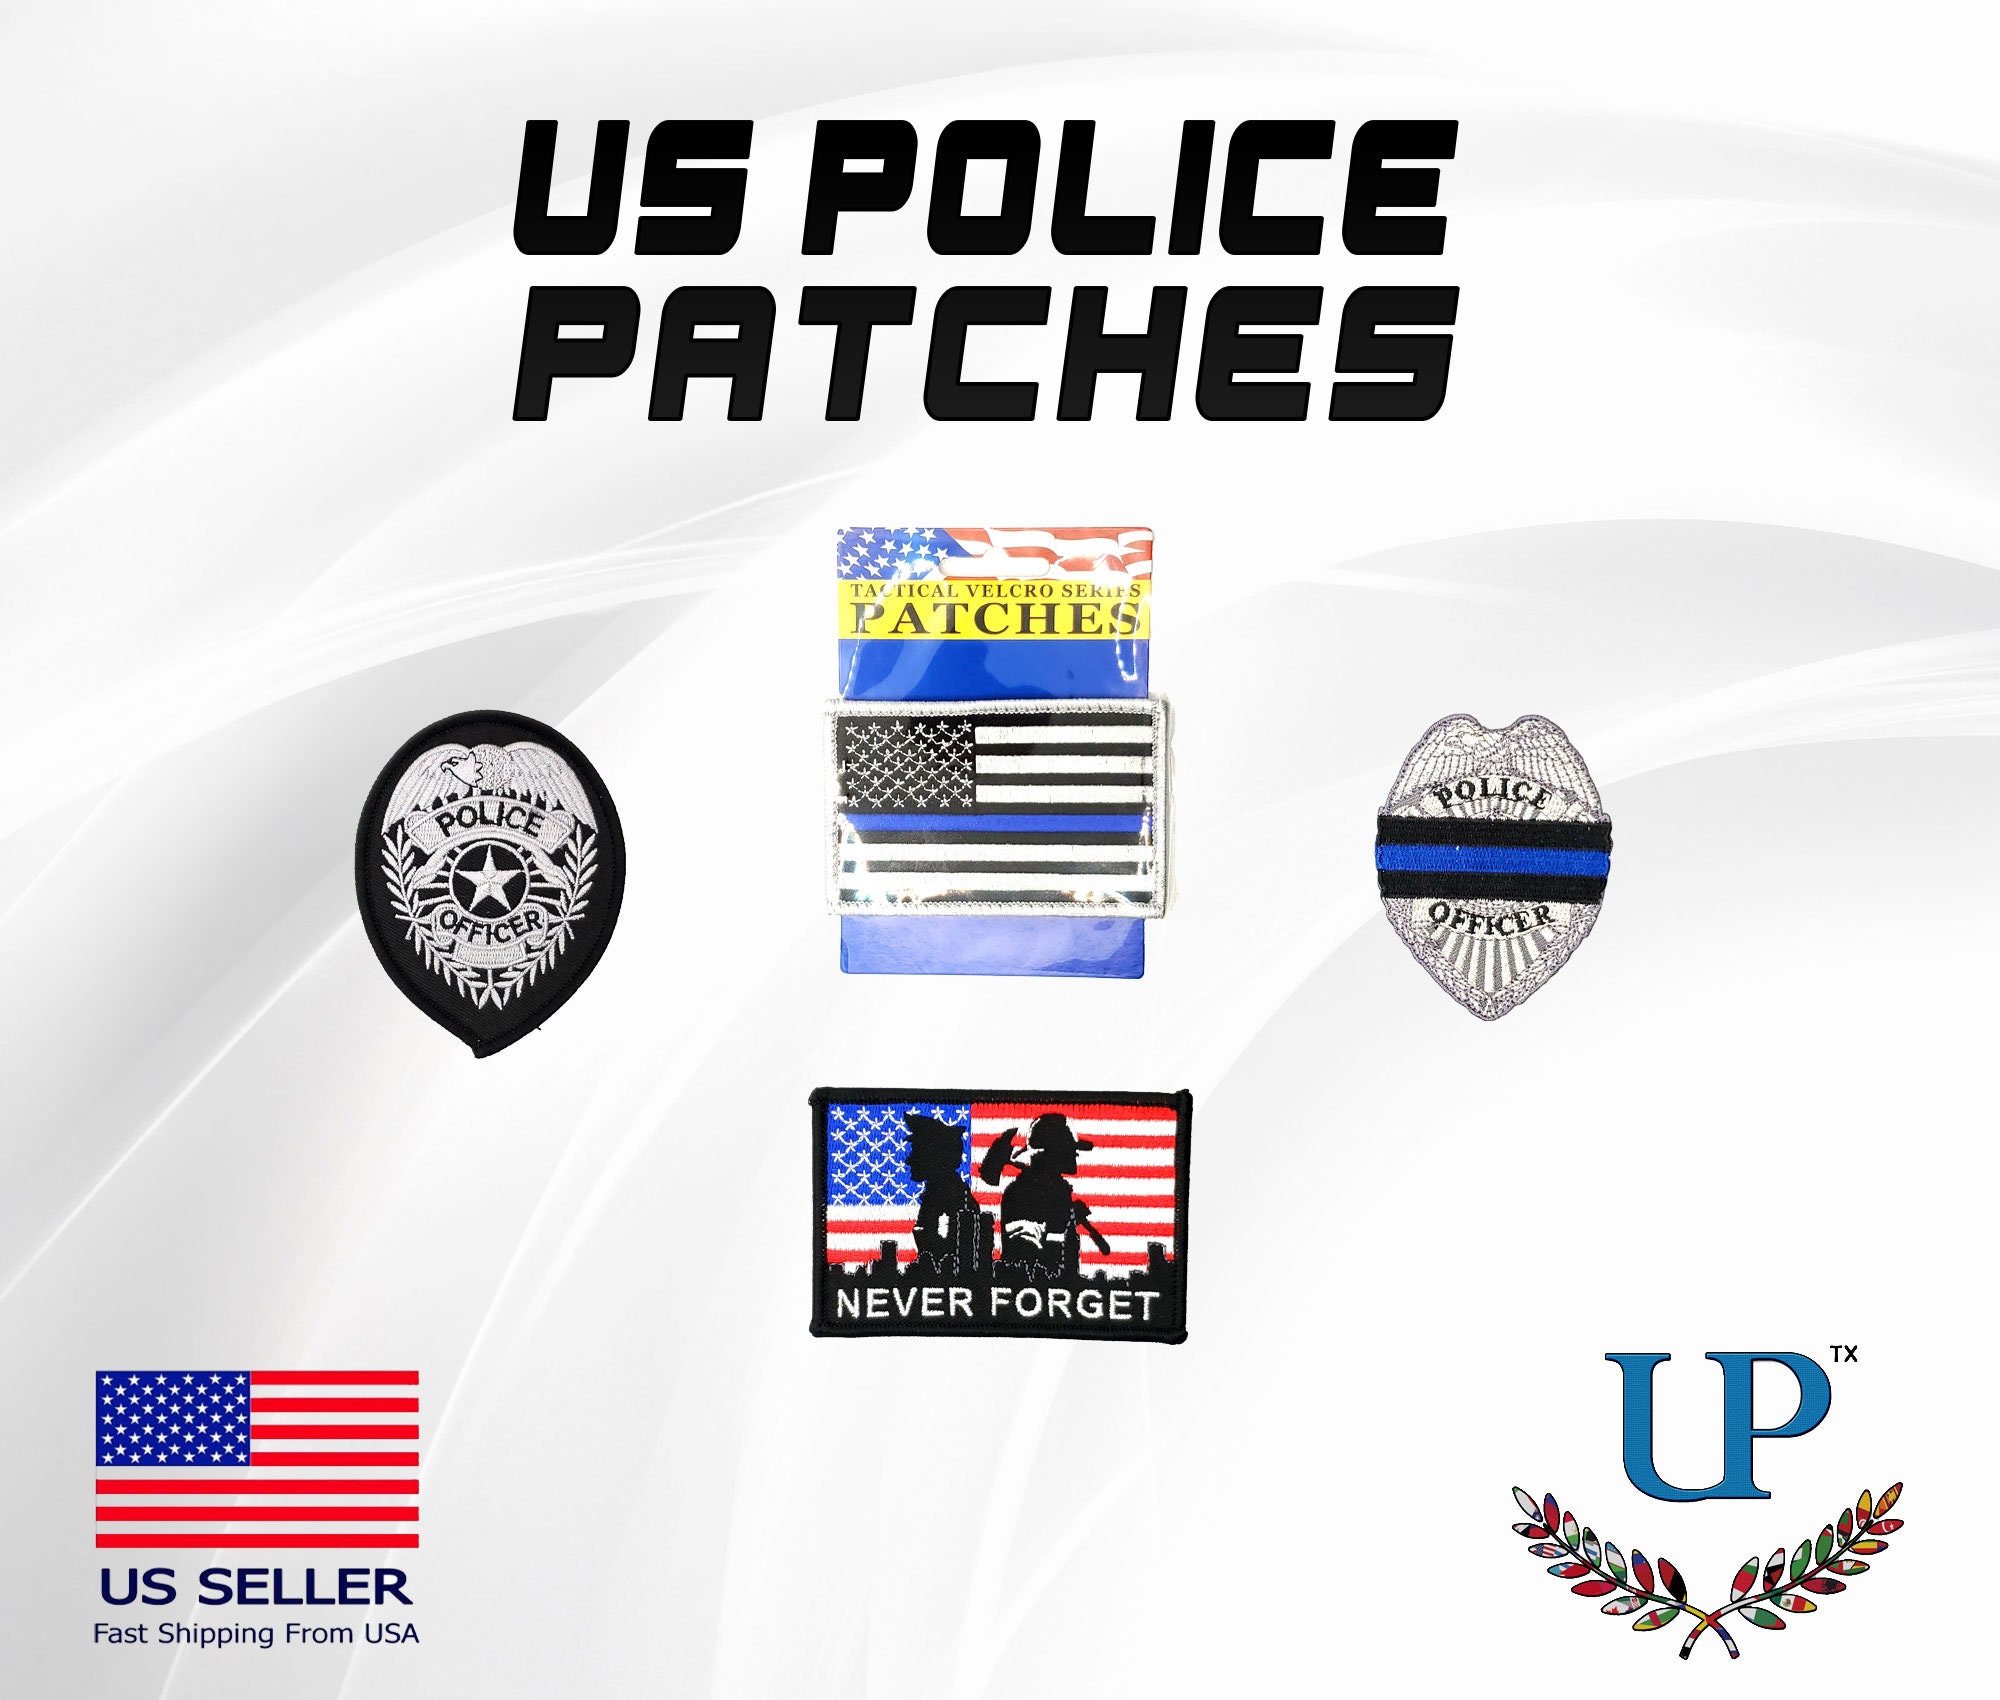 police velcro patch products for sale